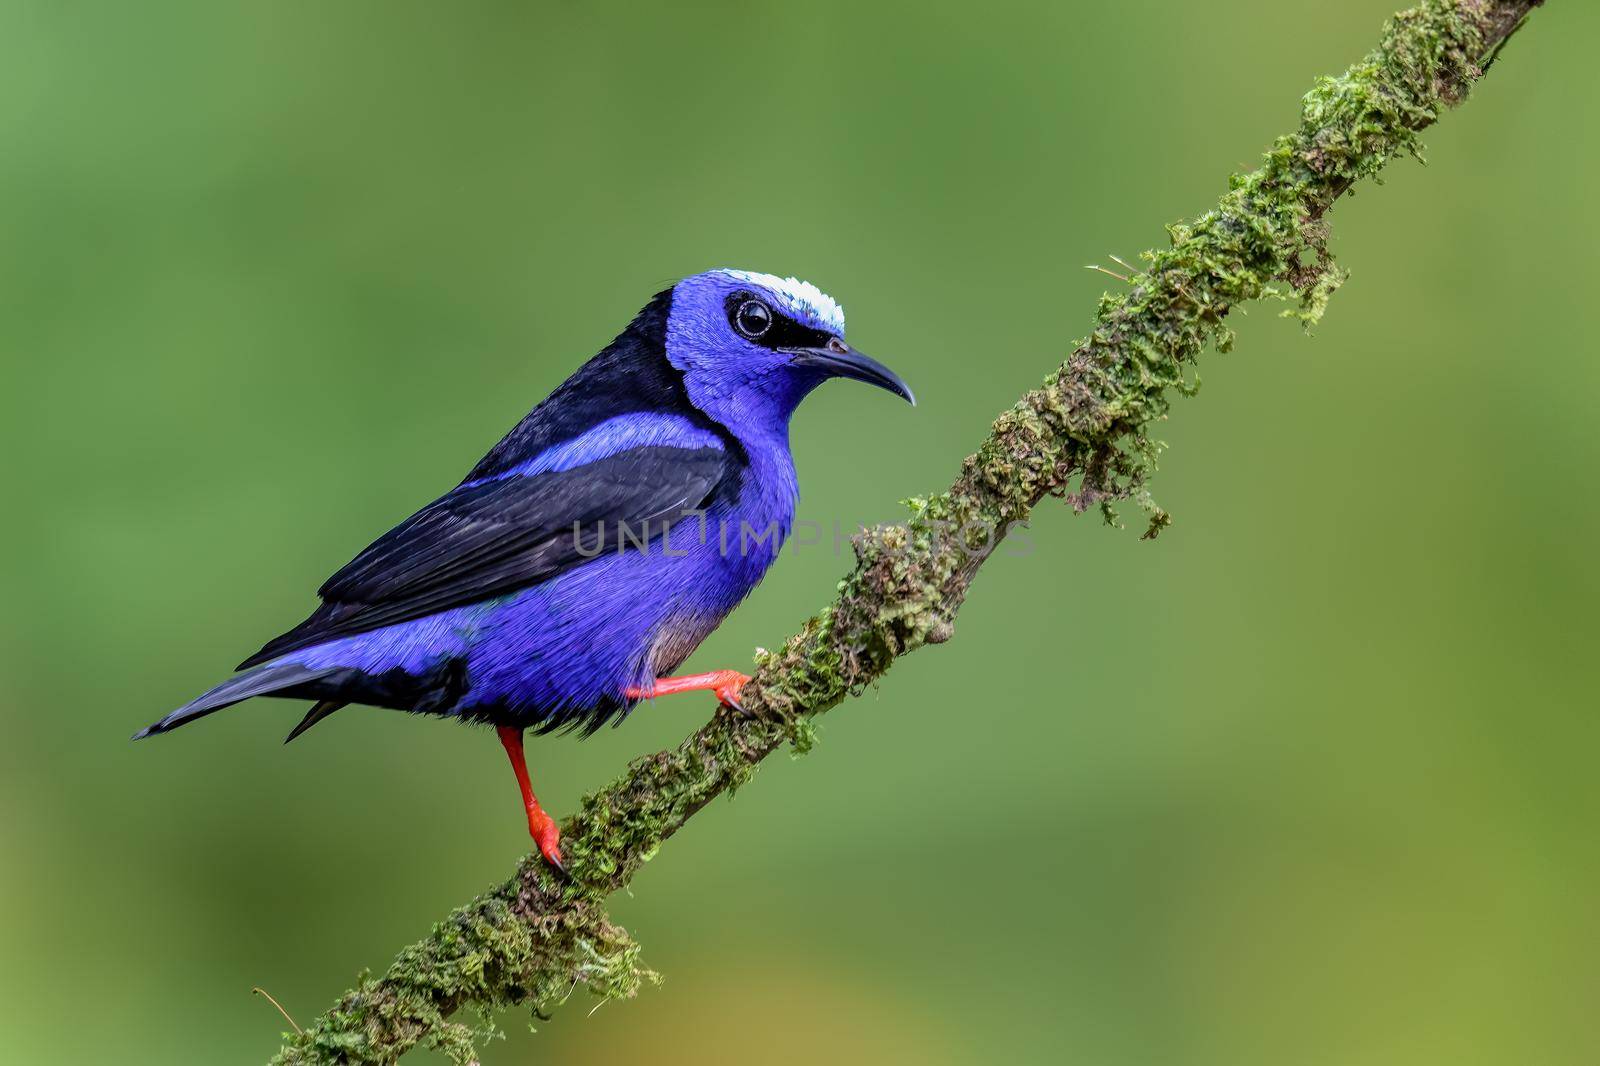 Red-legged honeycreeper (Cyanerpes cyaneus), La Fortuna, Volcano Arenal, Wildlife and birdwatching in Costa Rica.